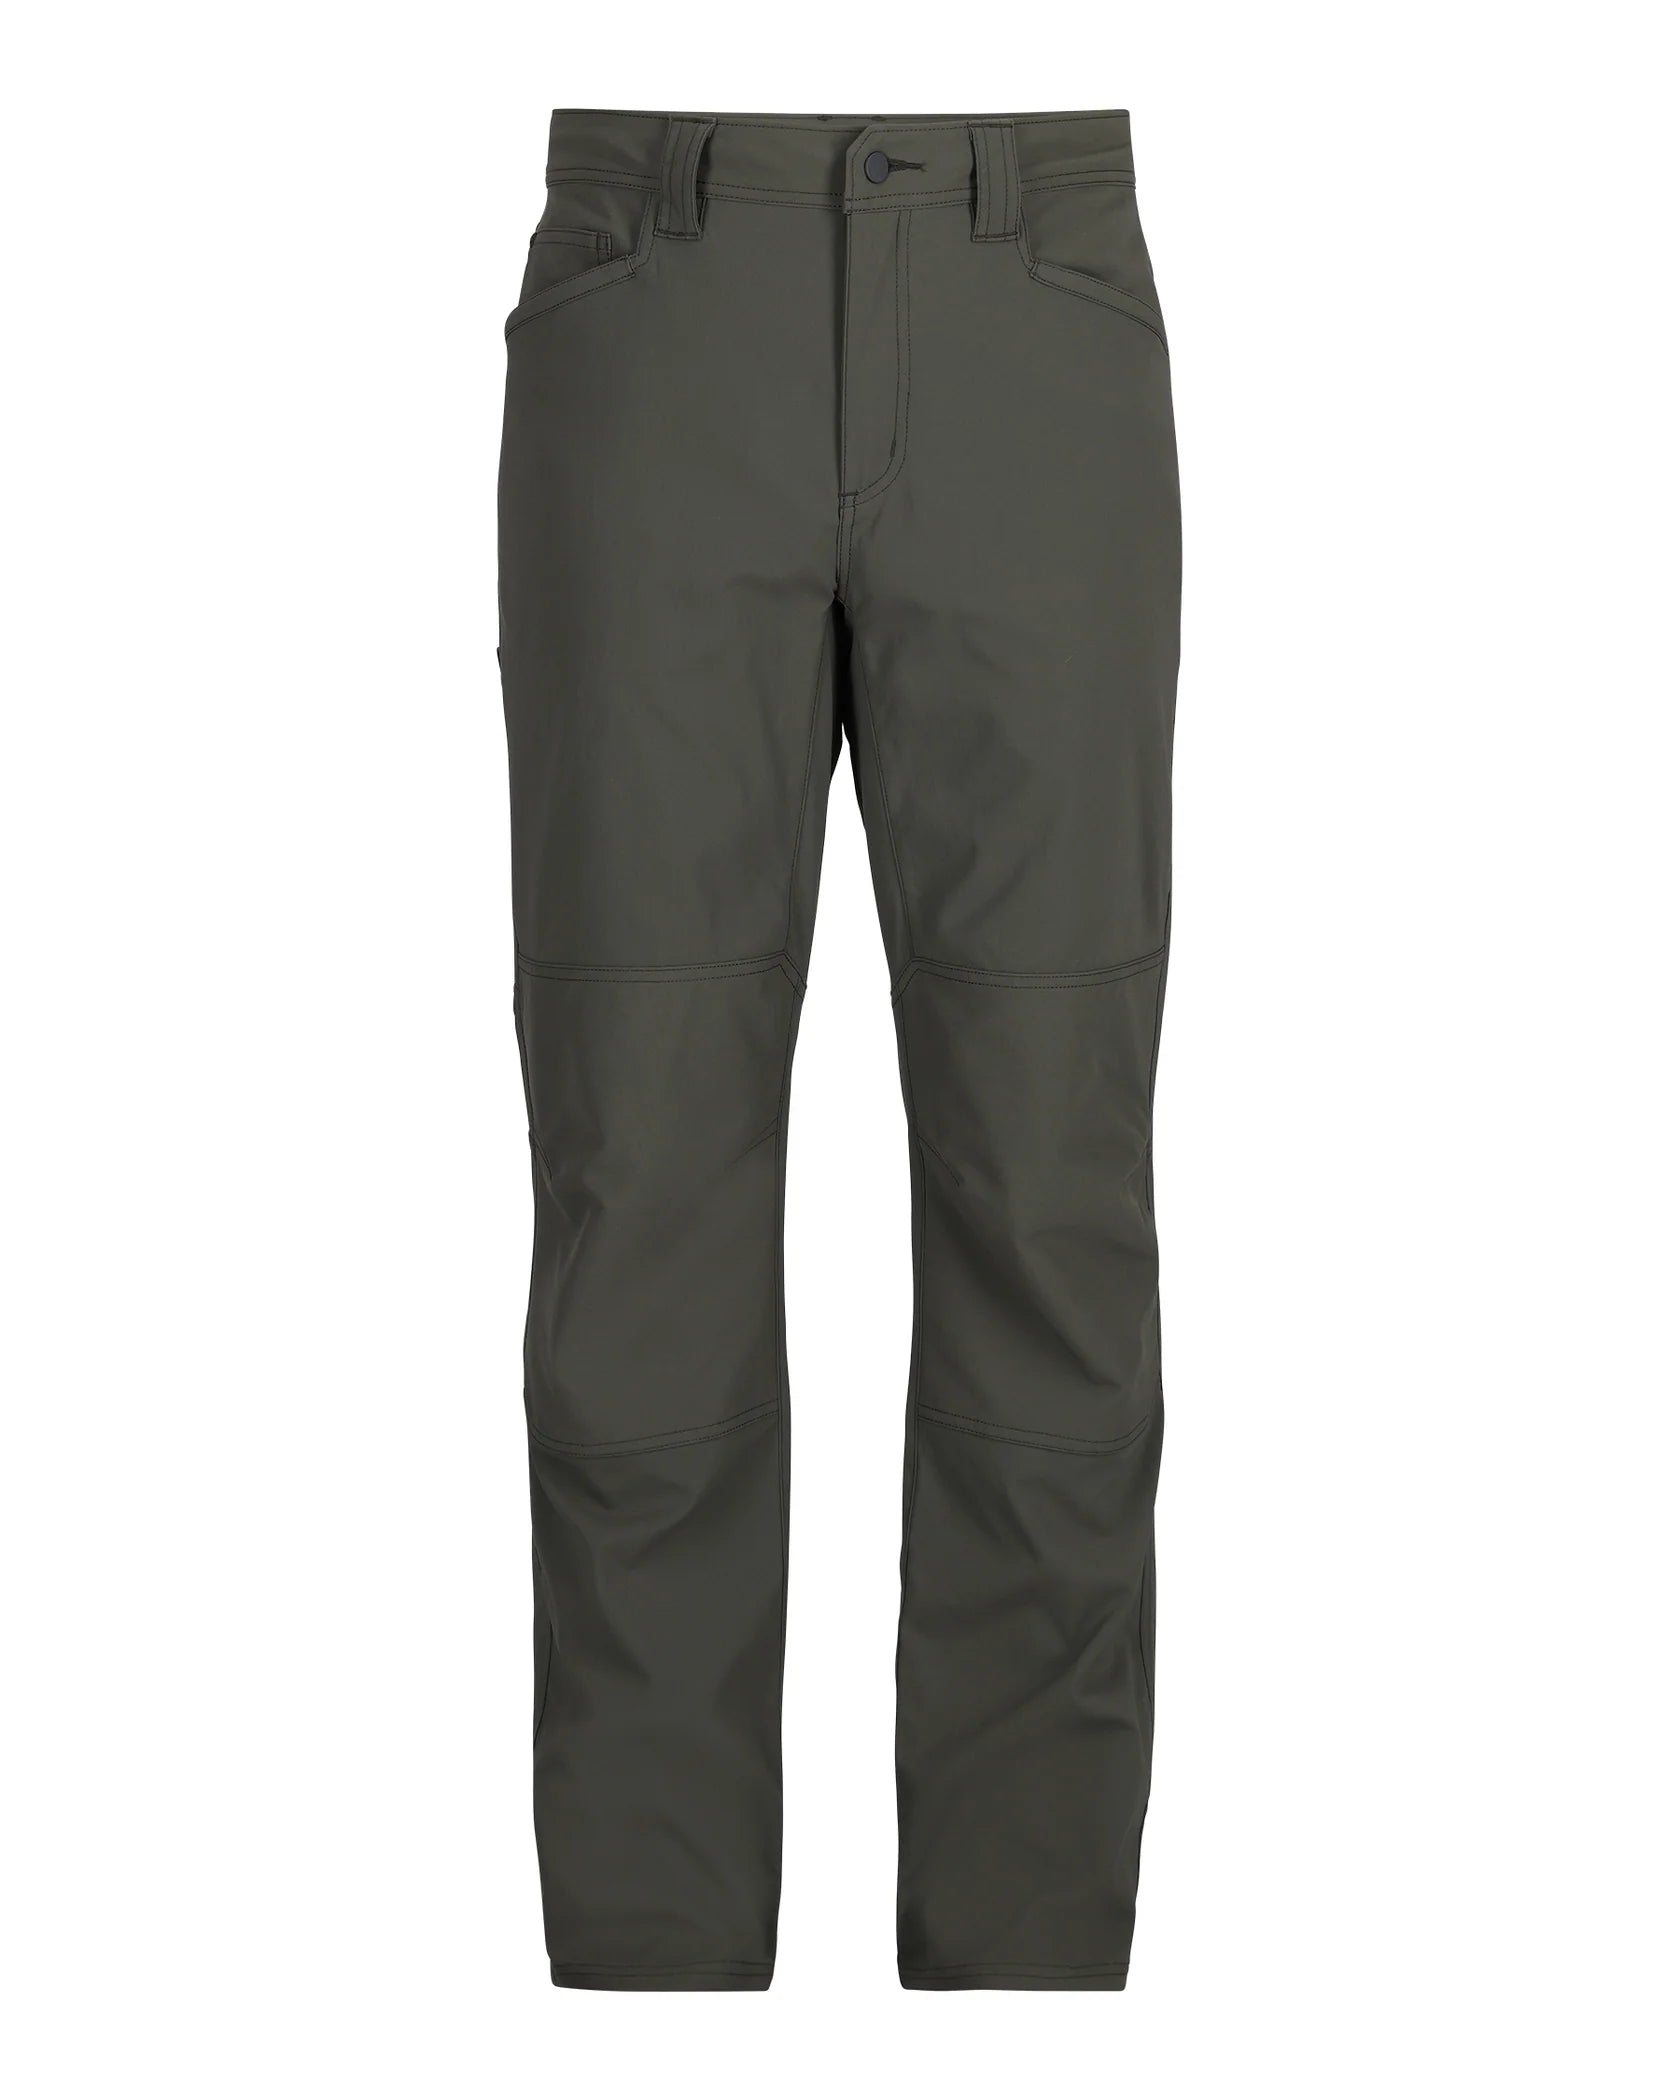 Simms Fast Action Pant - LOTWSHQ